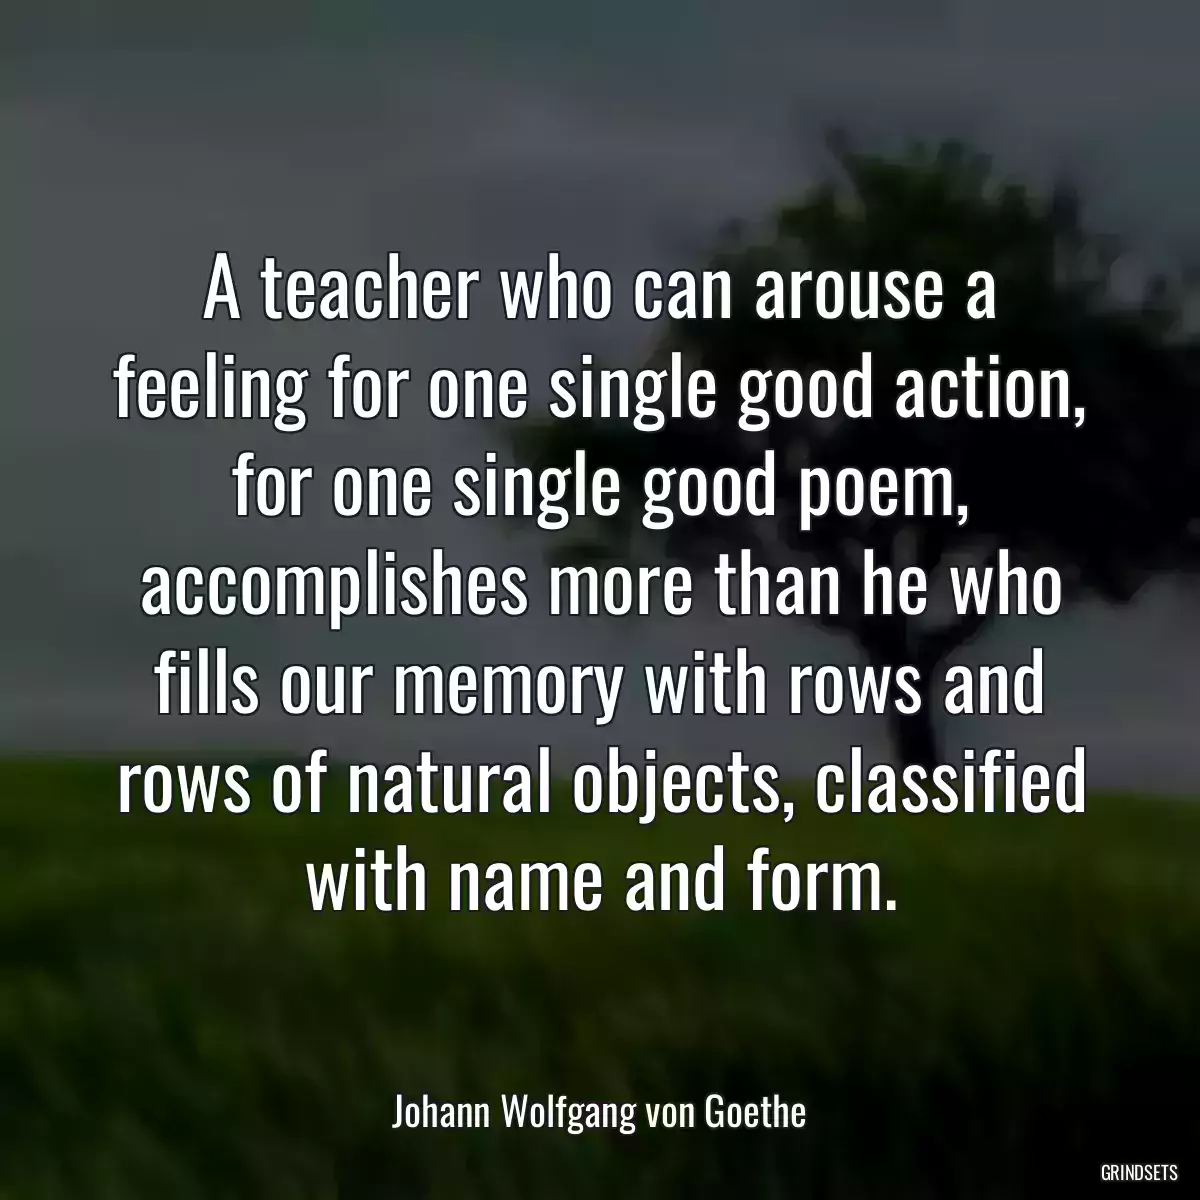 A teacher who can arouse a feeling for one single good action, for one single good poem, accomplishes more than he who fills our memory with rows and rows of natural objects, classified with name and form.